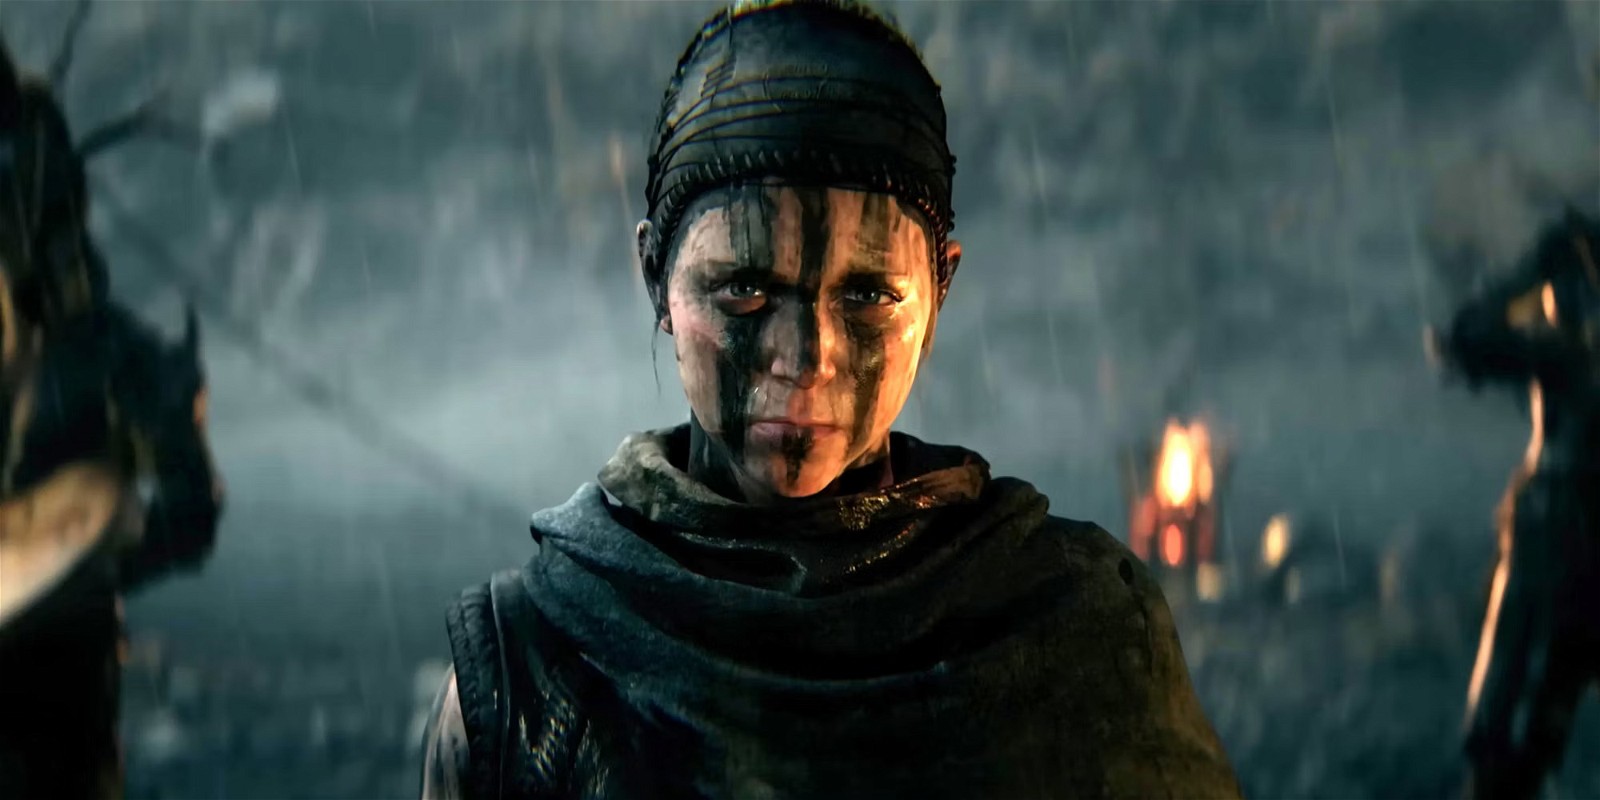 While first-party titans like Hellblade 2 will be sparsely added throughout the year, it's the smaller games that add value to Game Pass.